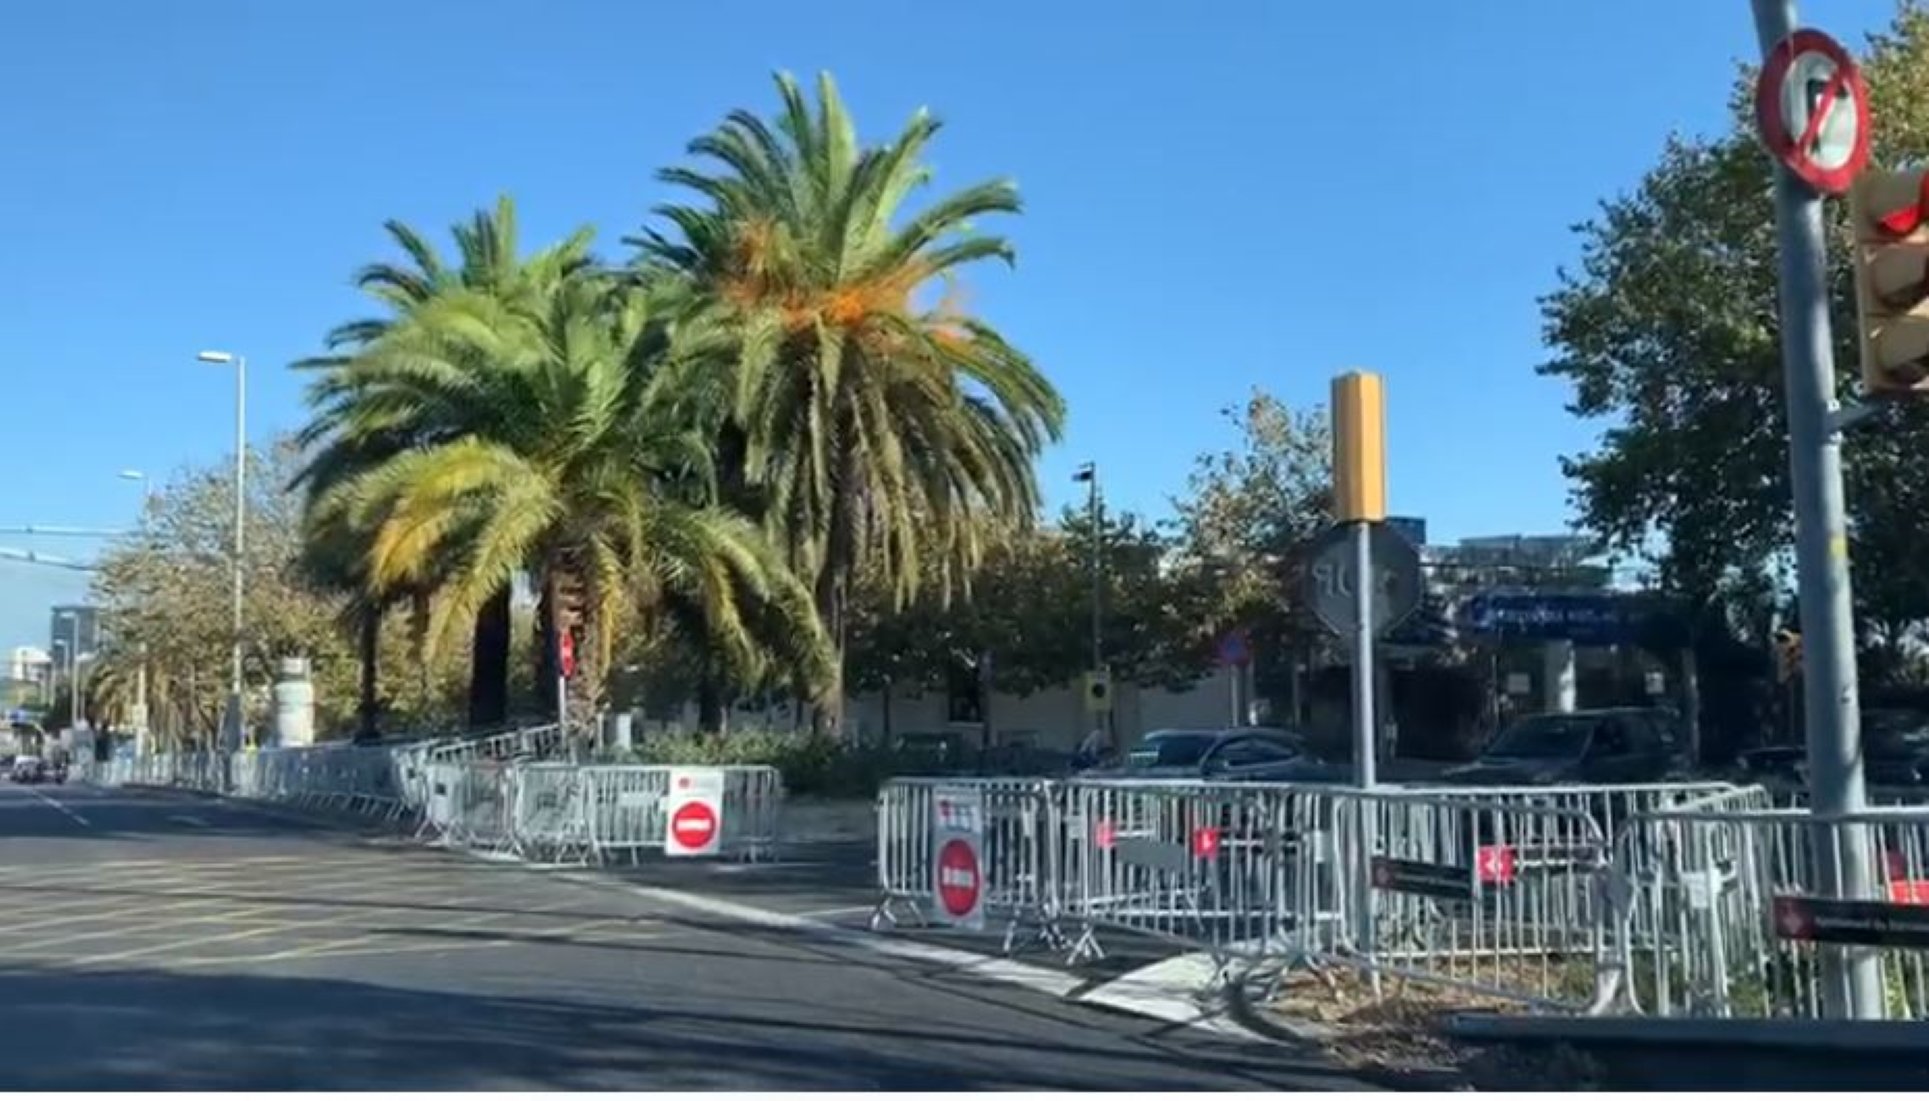 Barcelona's Diagonal, protest-proofed 24 hours before Spanish king's visit